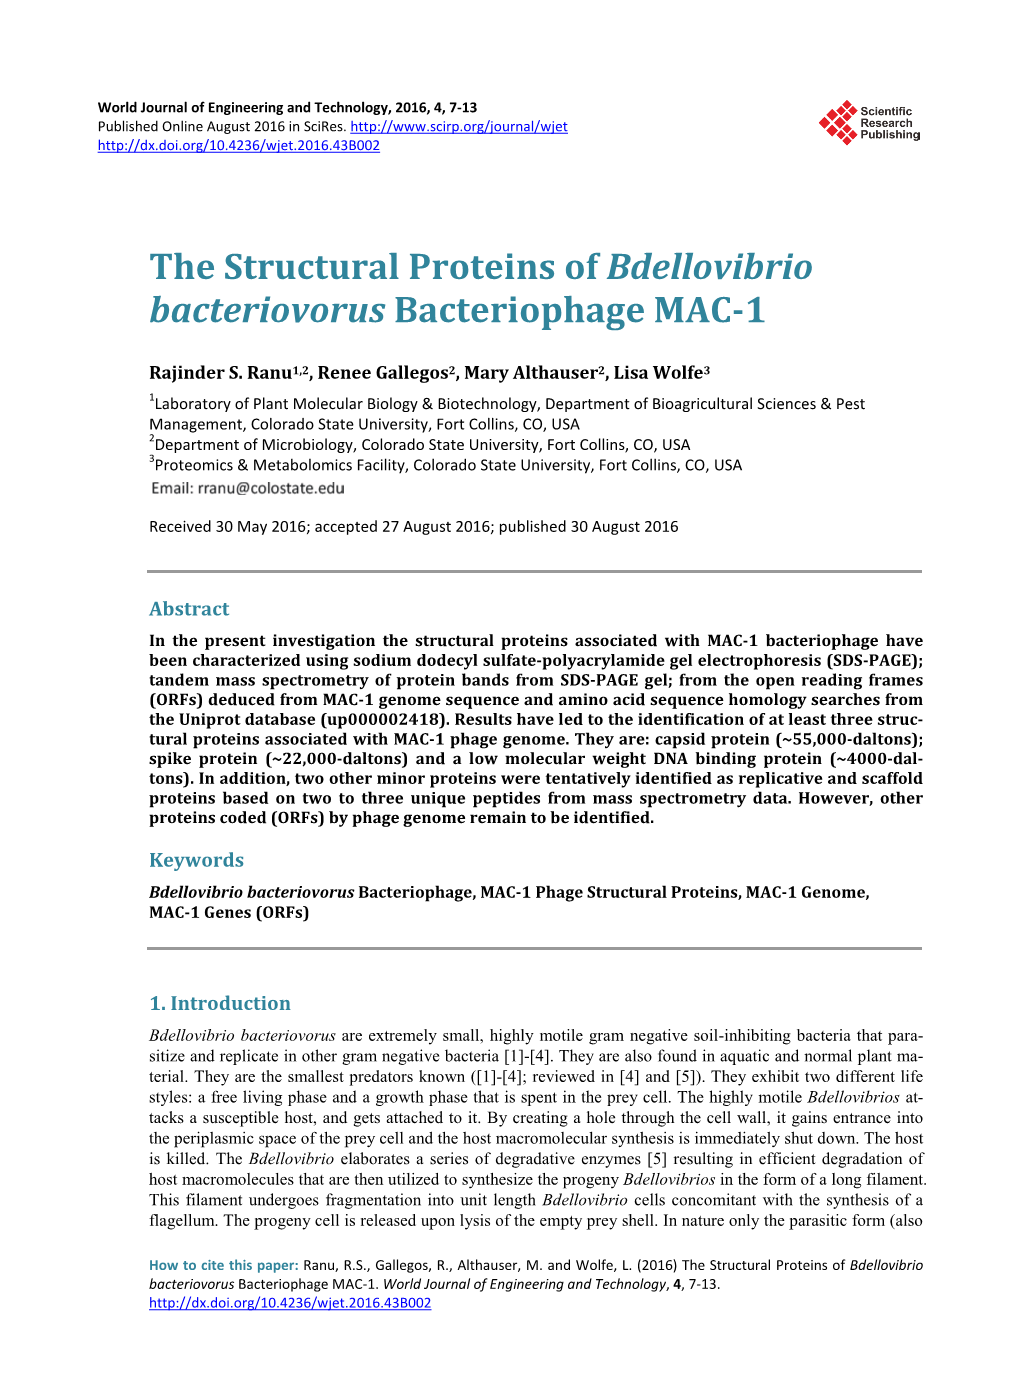 The Structural Proteins of Bdellovibrio Bacteriovorus Bacteriophage MAC-1